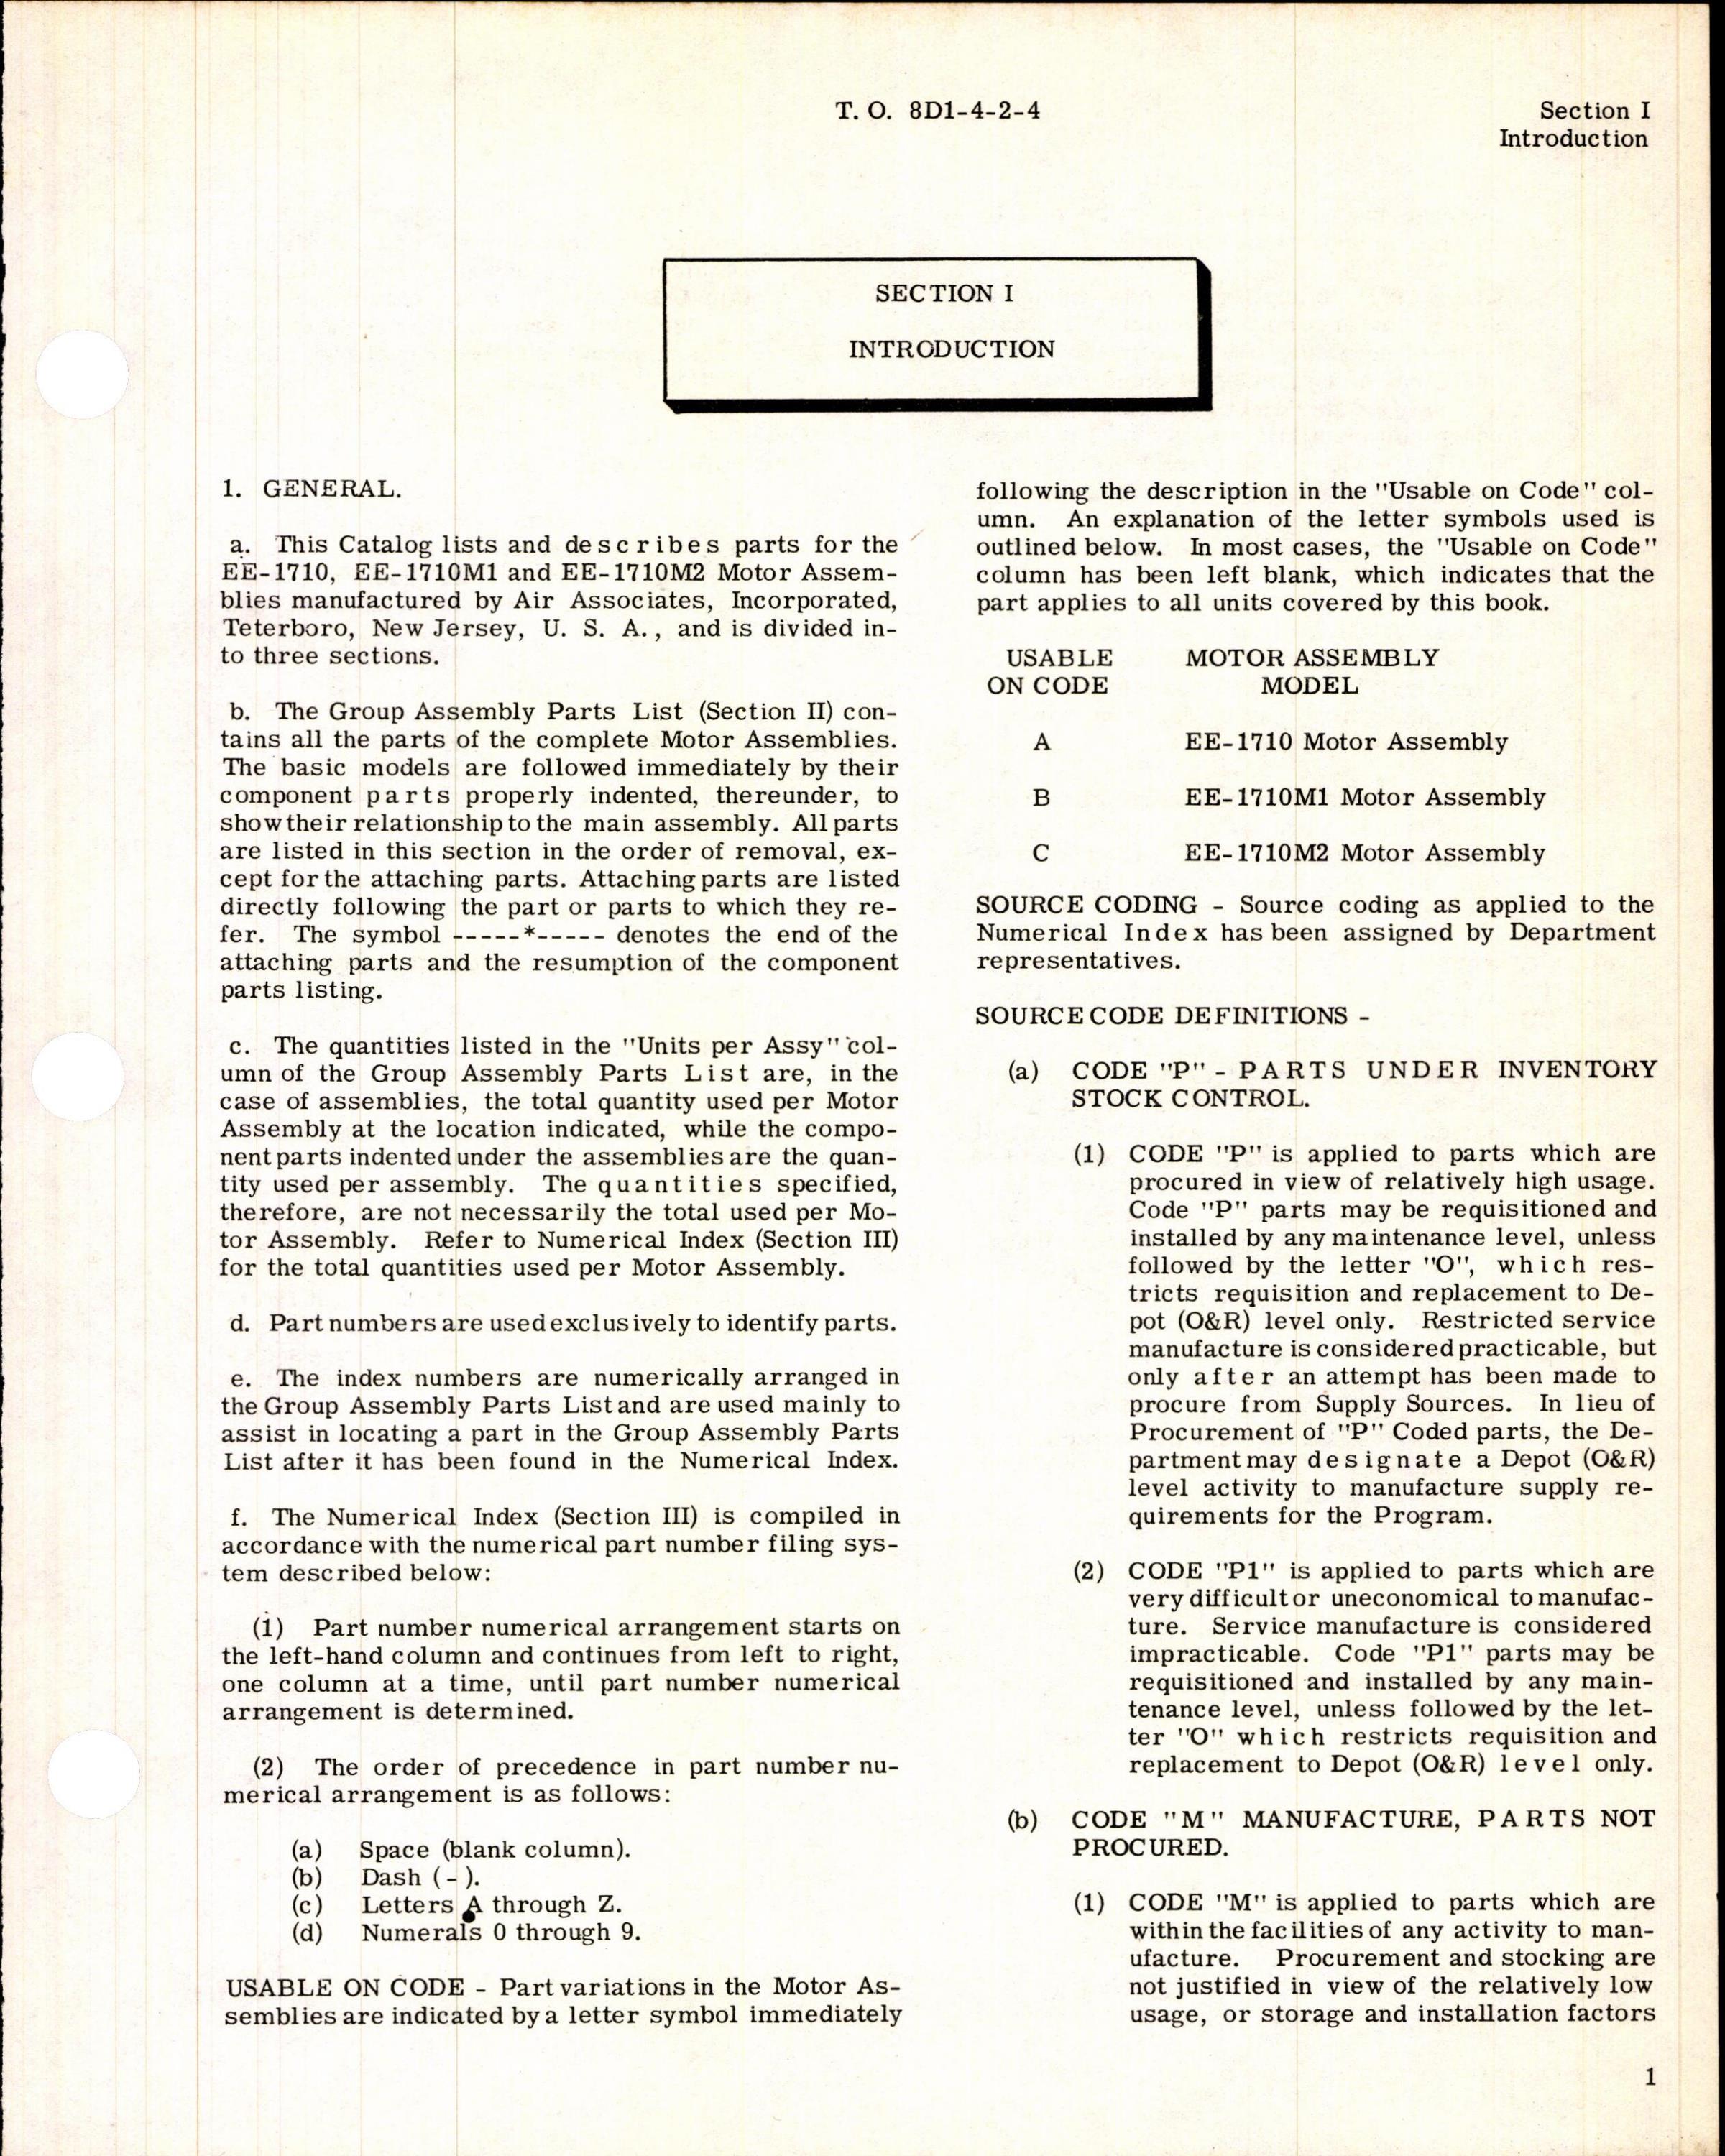 Sample page 5 from AirCorps Library document: Illustrated Parts Breakdown for Air Associates Motor Assembly